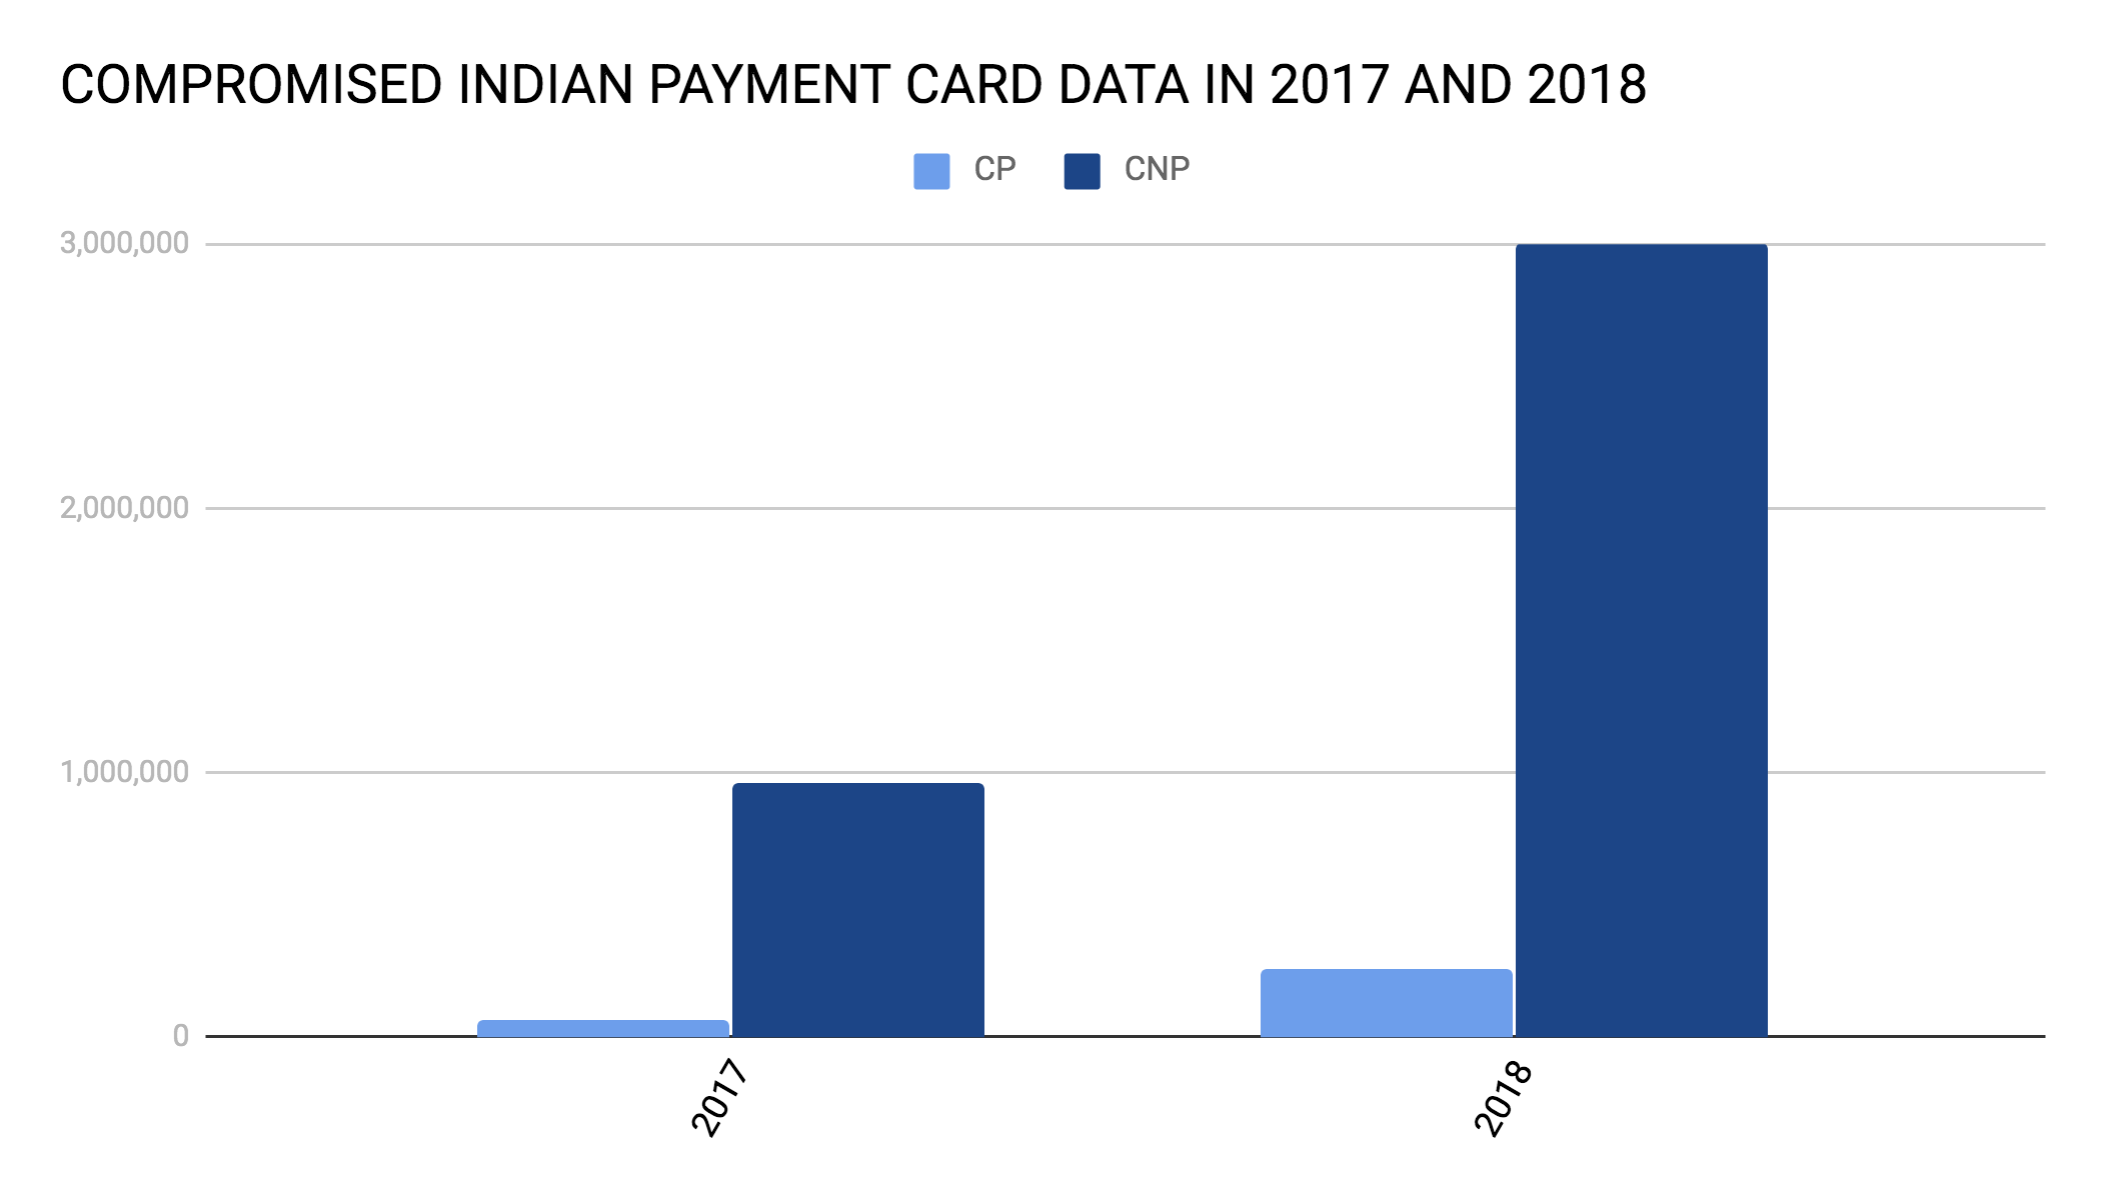 Compromised Indian payment card data in 2017 and 2018 statistics